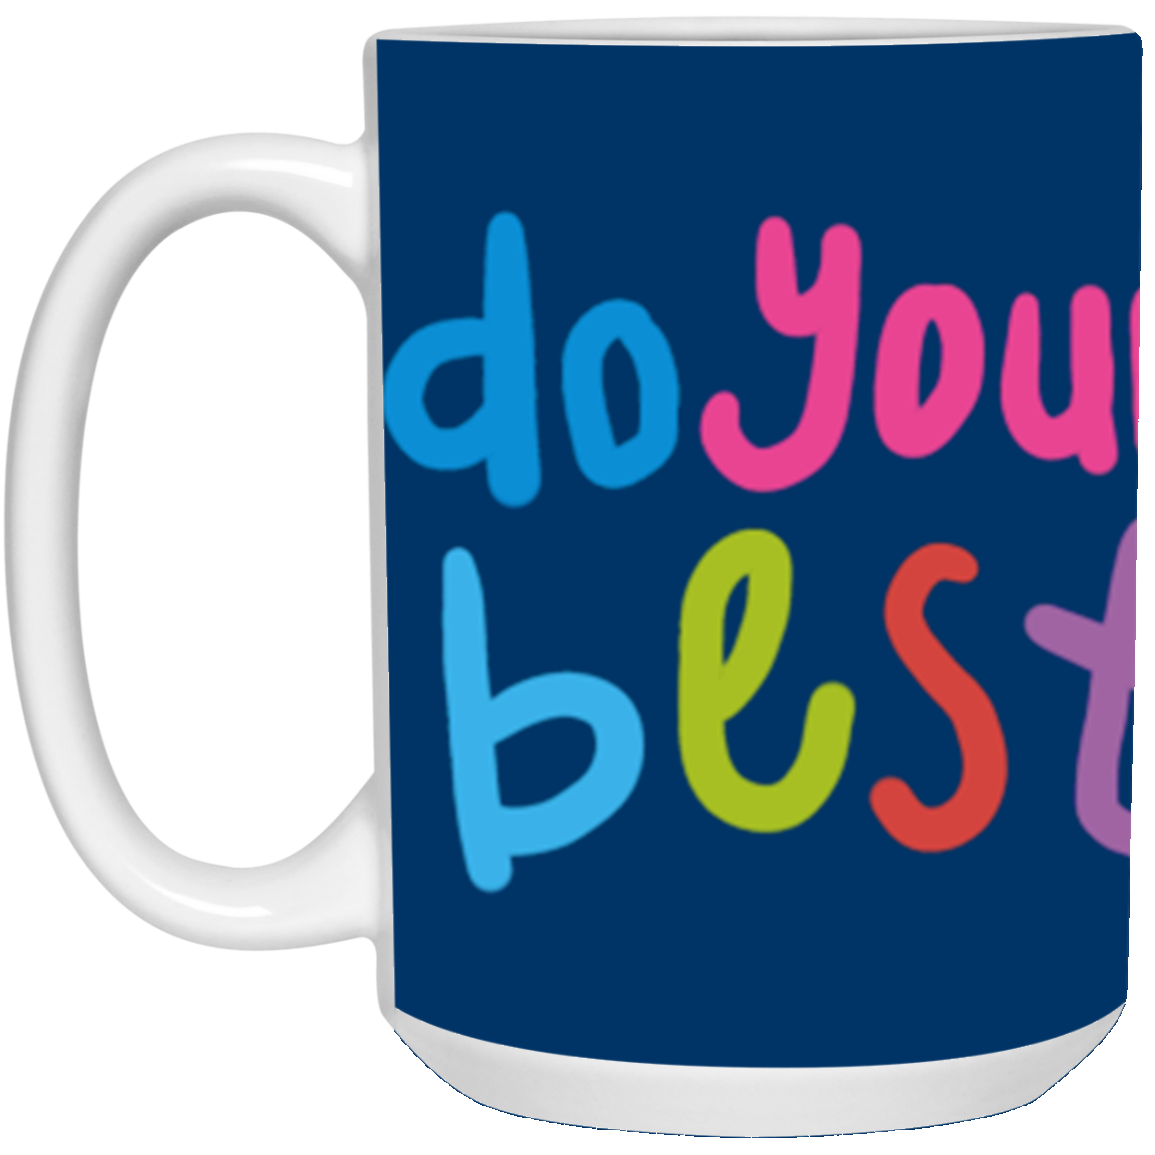 DO YOUR BEST JUST DO IT-MUGS